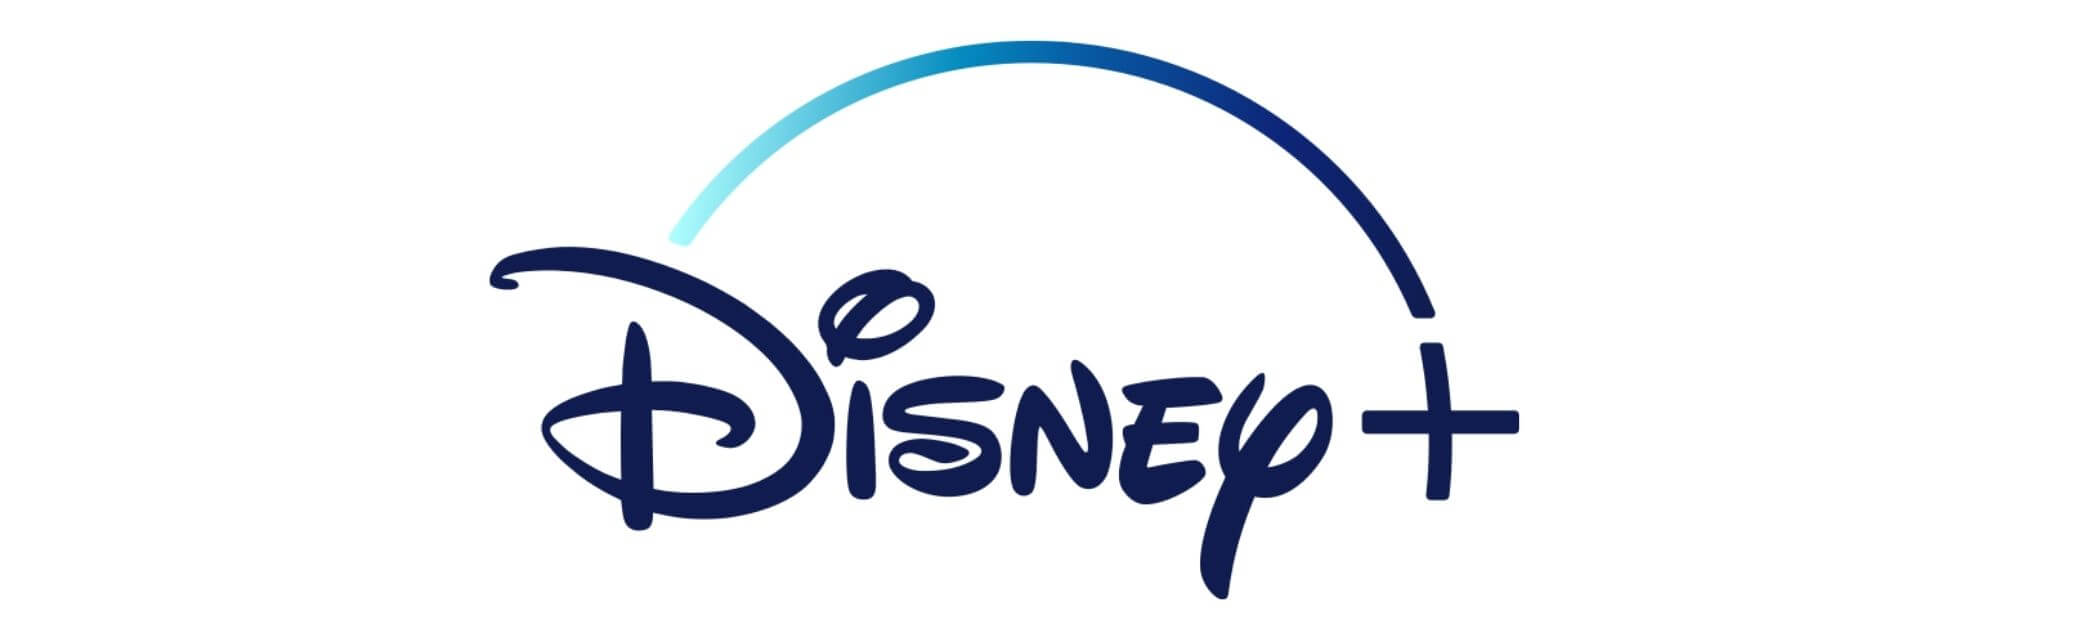 Q&A with Disney+ VP Product on customer-centricity, effective prioritization & building excellent products